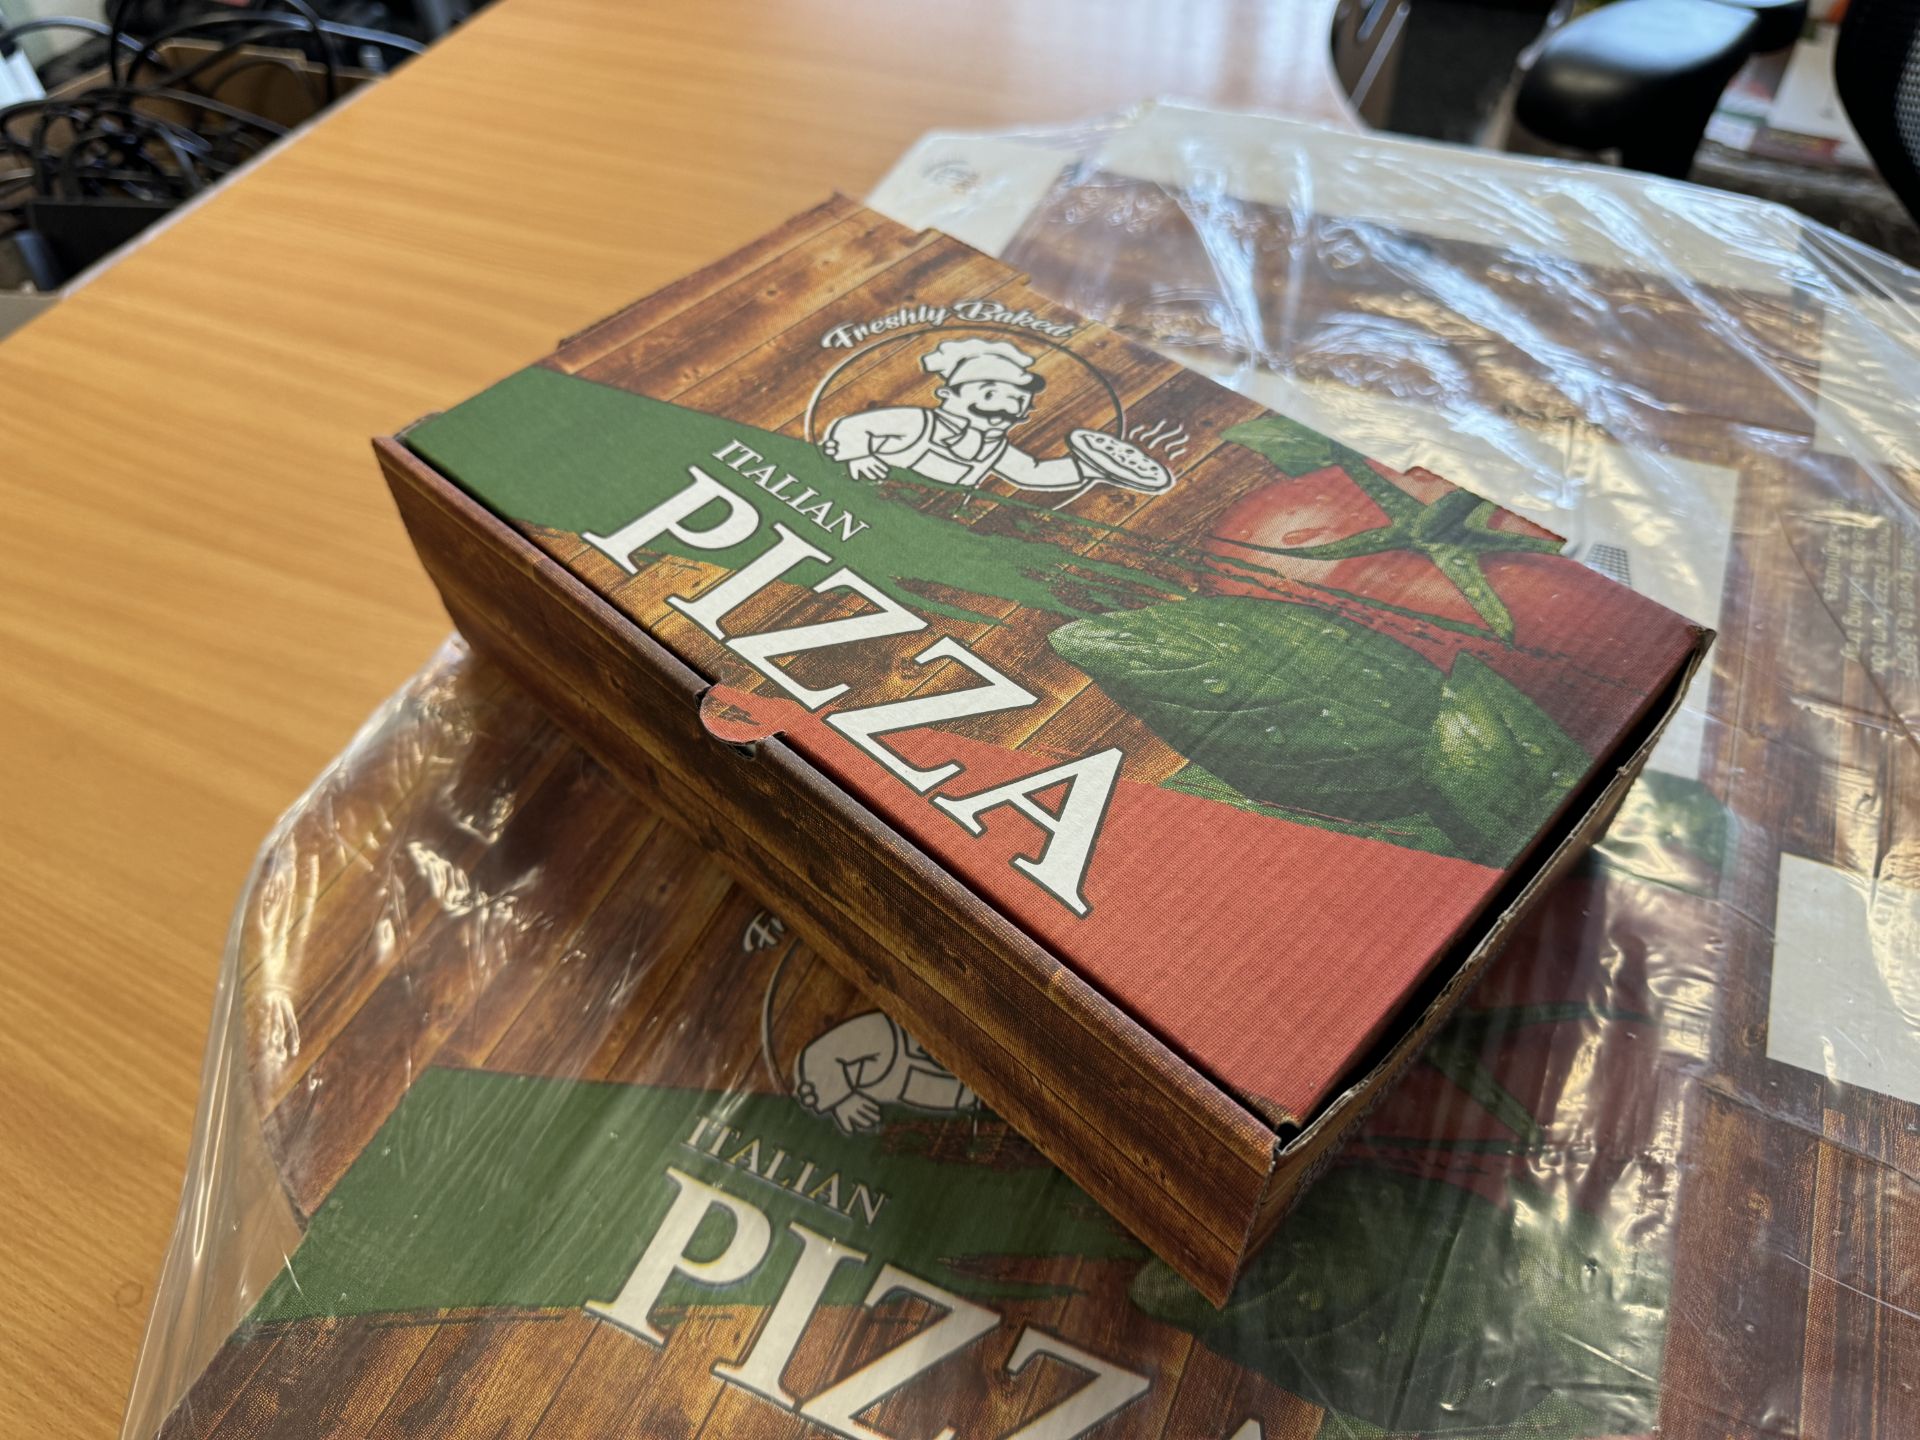 Circa 900 - Italian Pizza Calzone Boxes (Cardboard) - Multiple Uses RRP £130 - Image 4 of 13